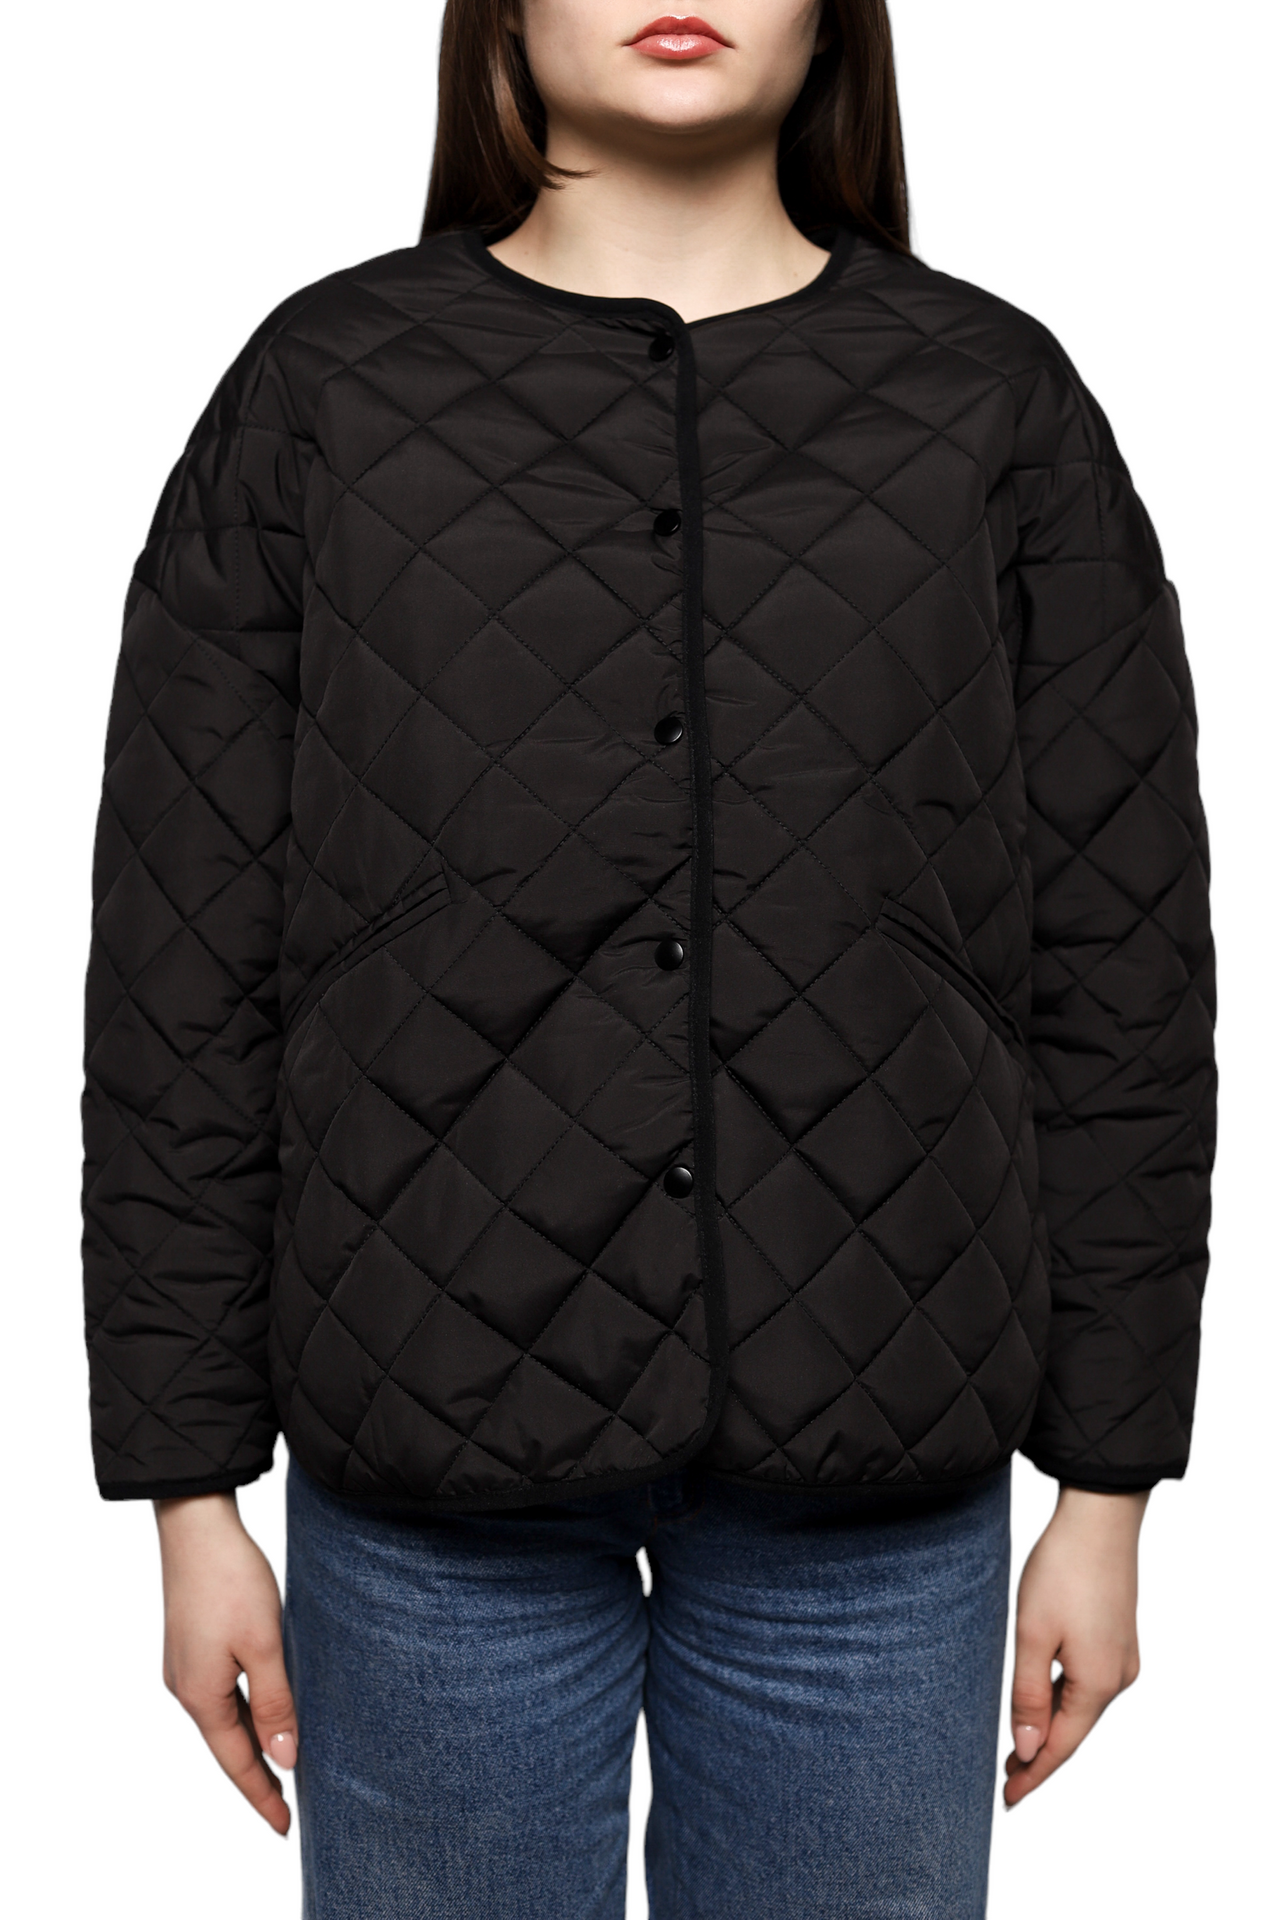 Toteme Quilted Jacket Black